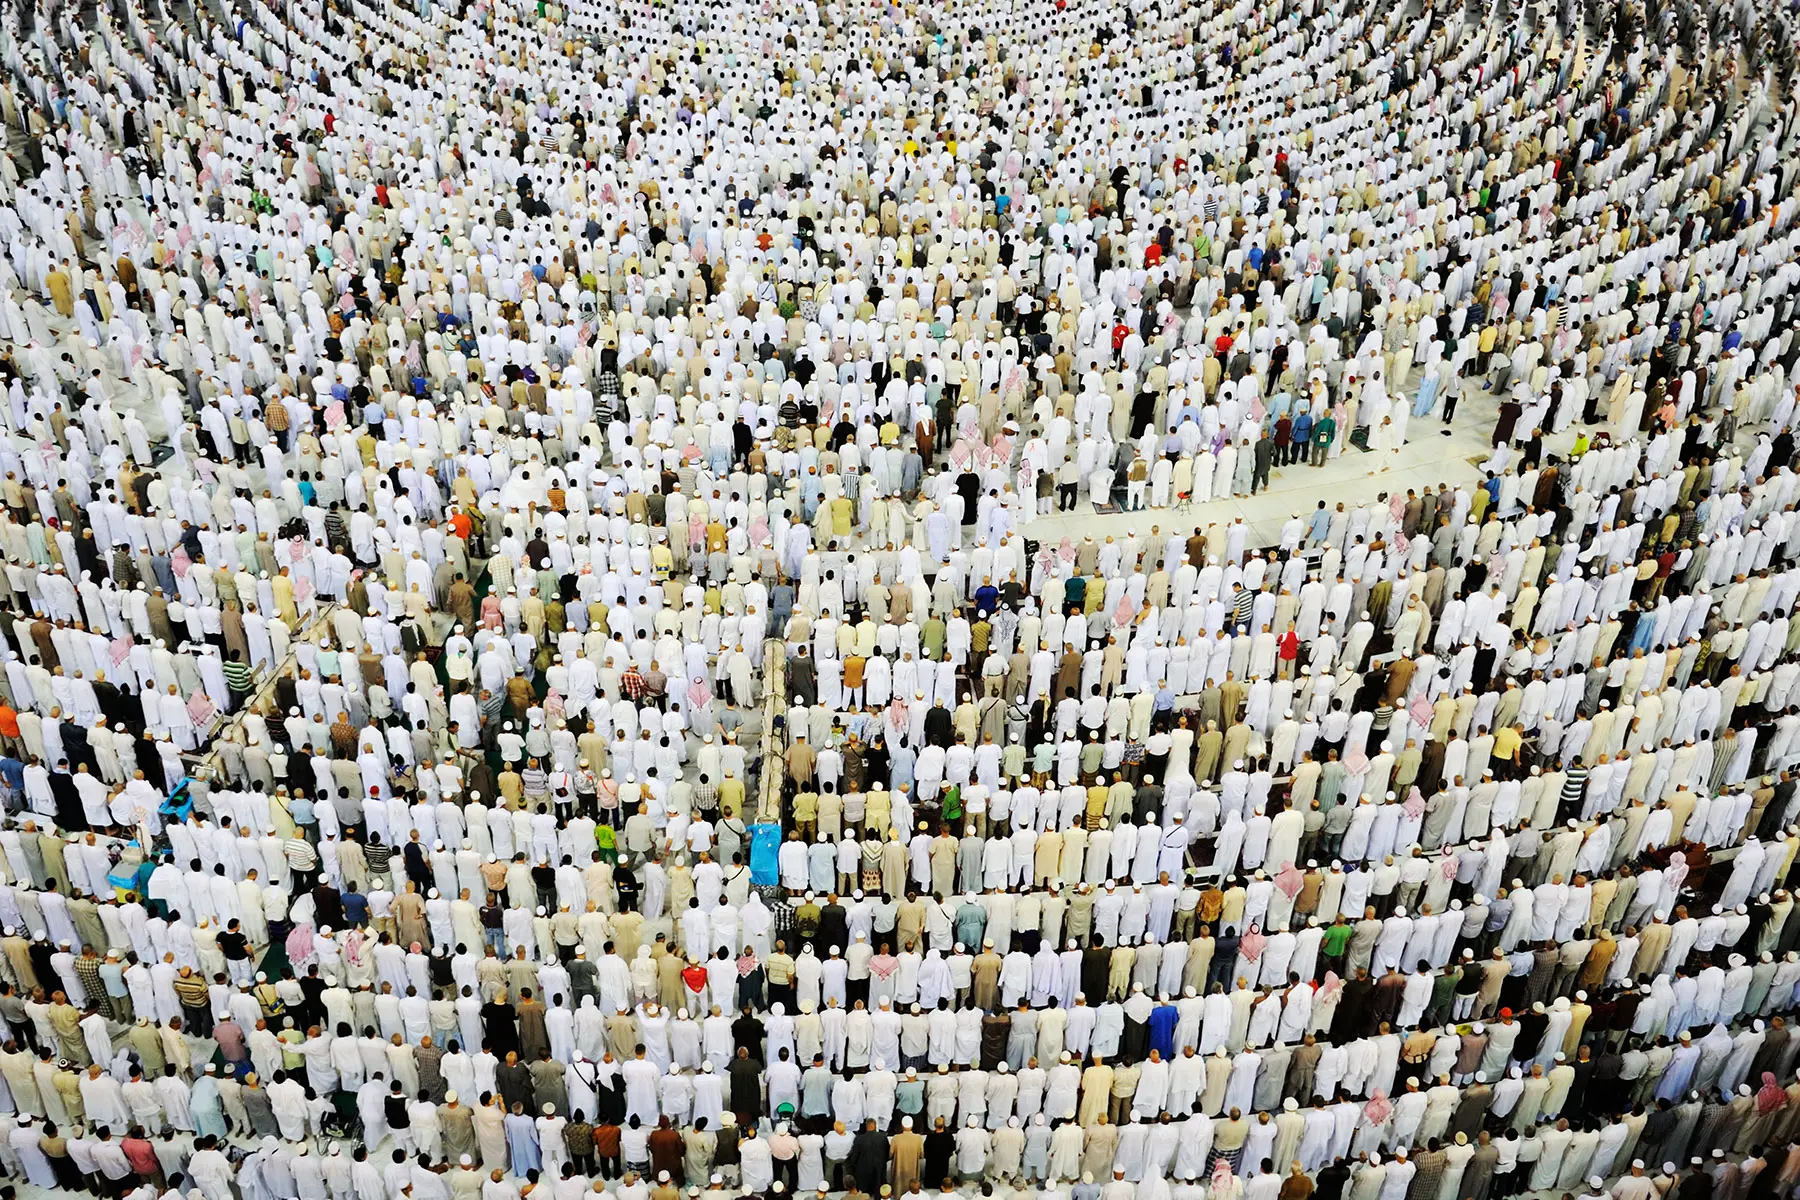 A large congregation for Friday prayer in a mosque in Mecca